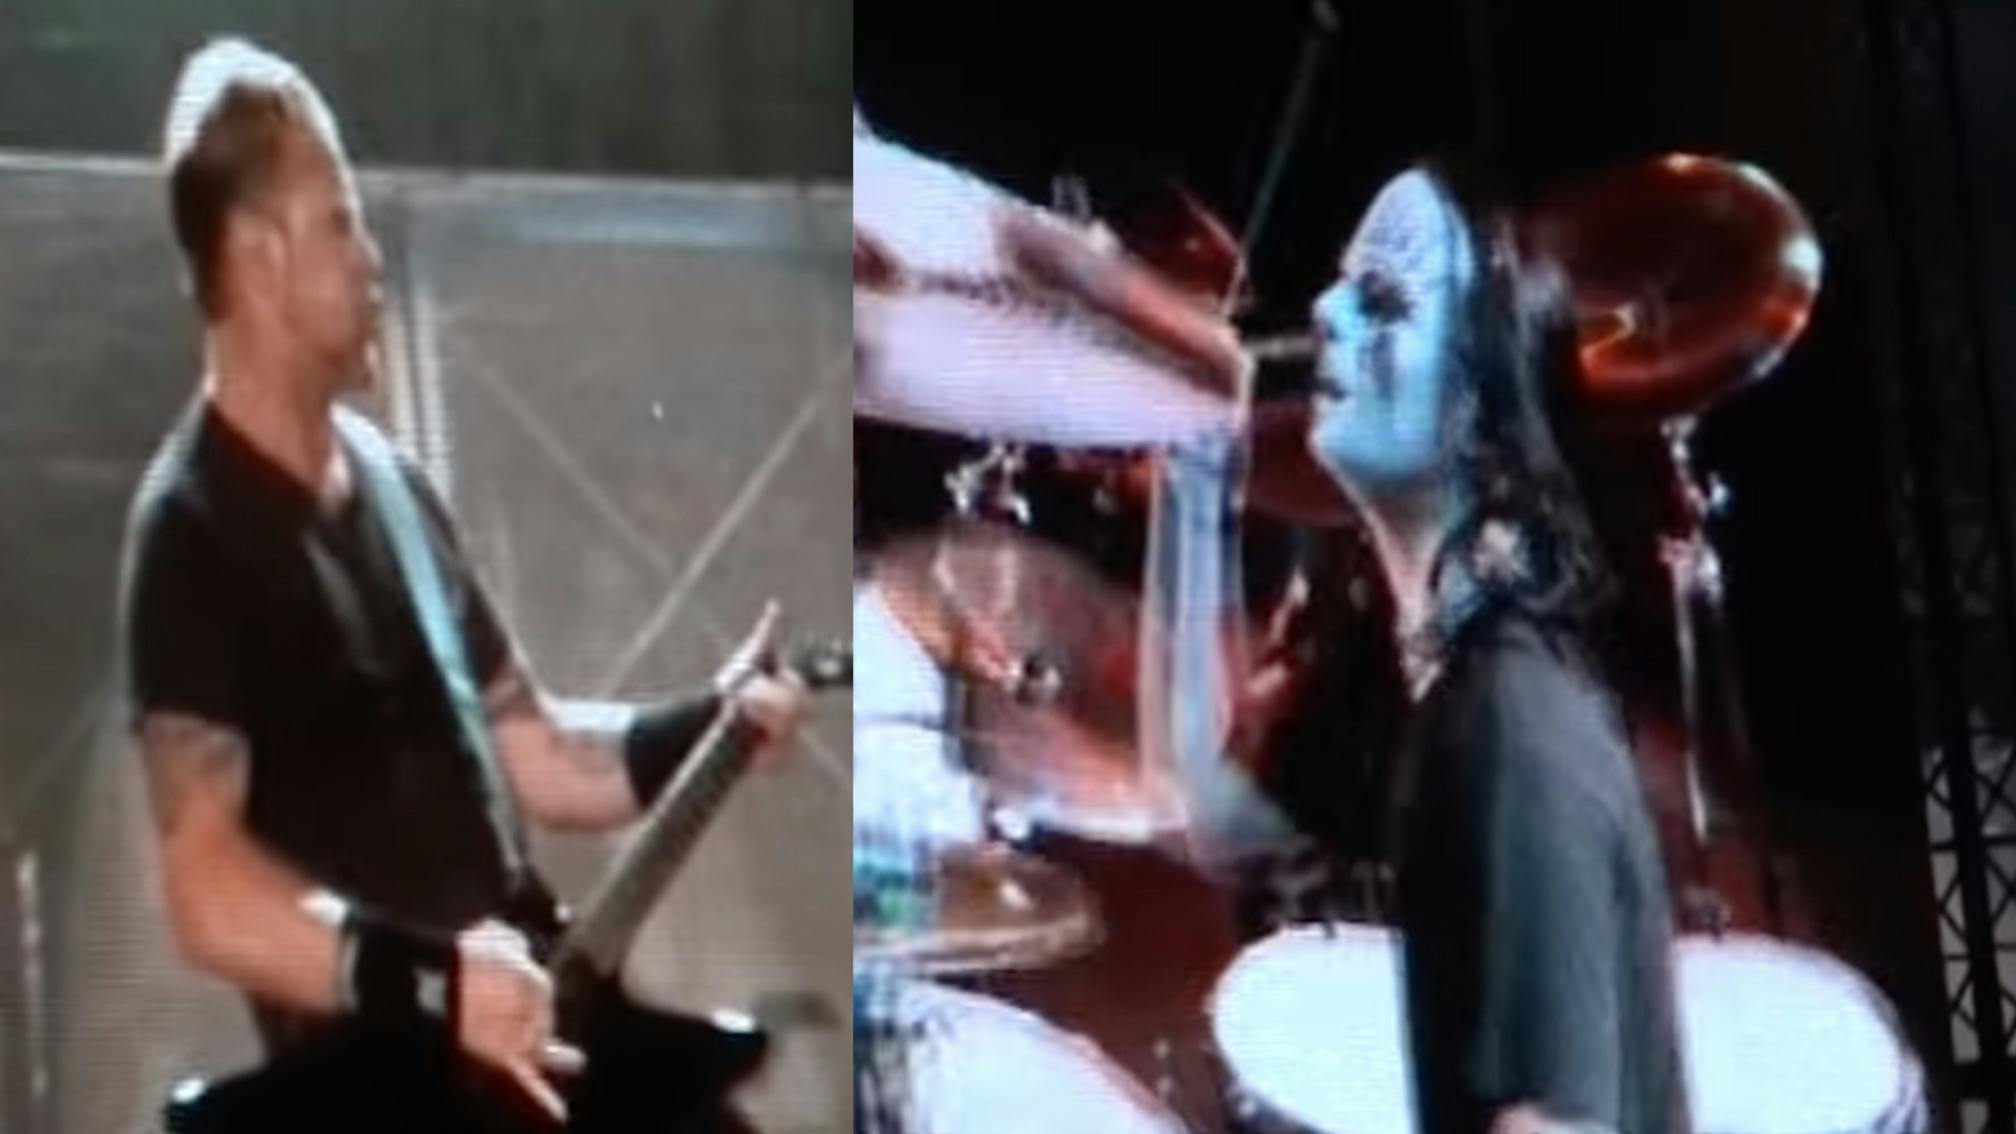 “He saved the day”: Download Festival’s Andy Copping remembers Joey Jordison’s 2004 Metallica set